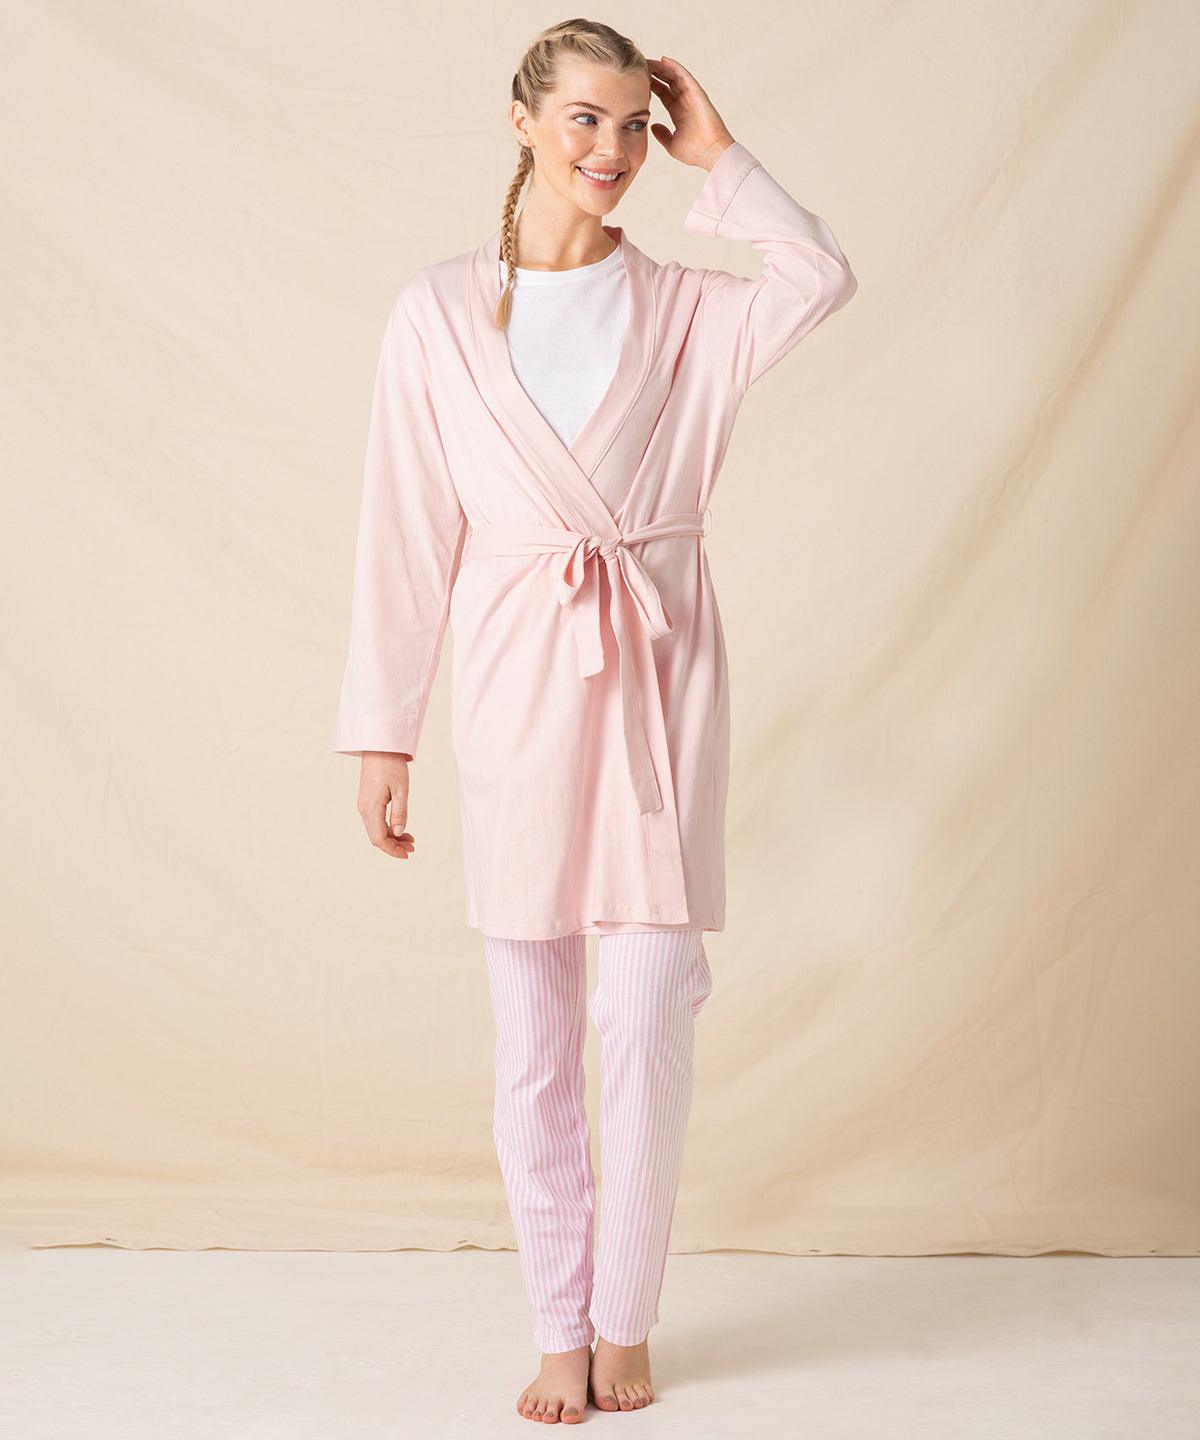 White - Women's wrap robe Robes Towel City Gifting & Accessories, Homewares & Towelling, Lounge & Underwear, Must Haves, New Sizes for 2022 Schoolwear Centres